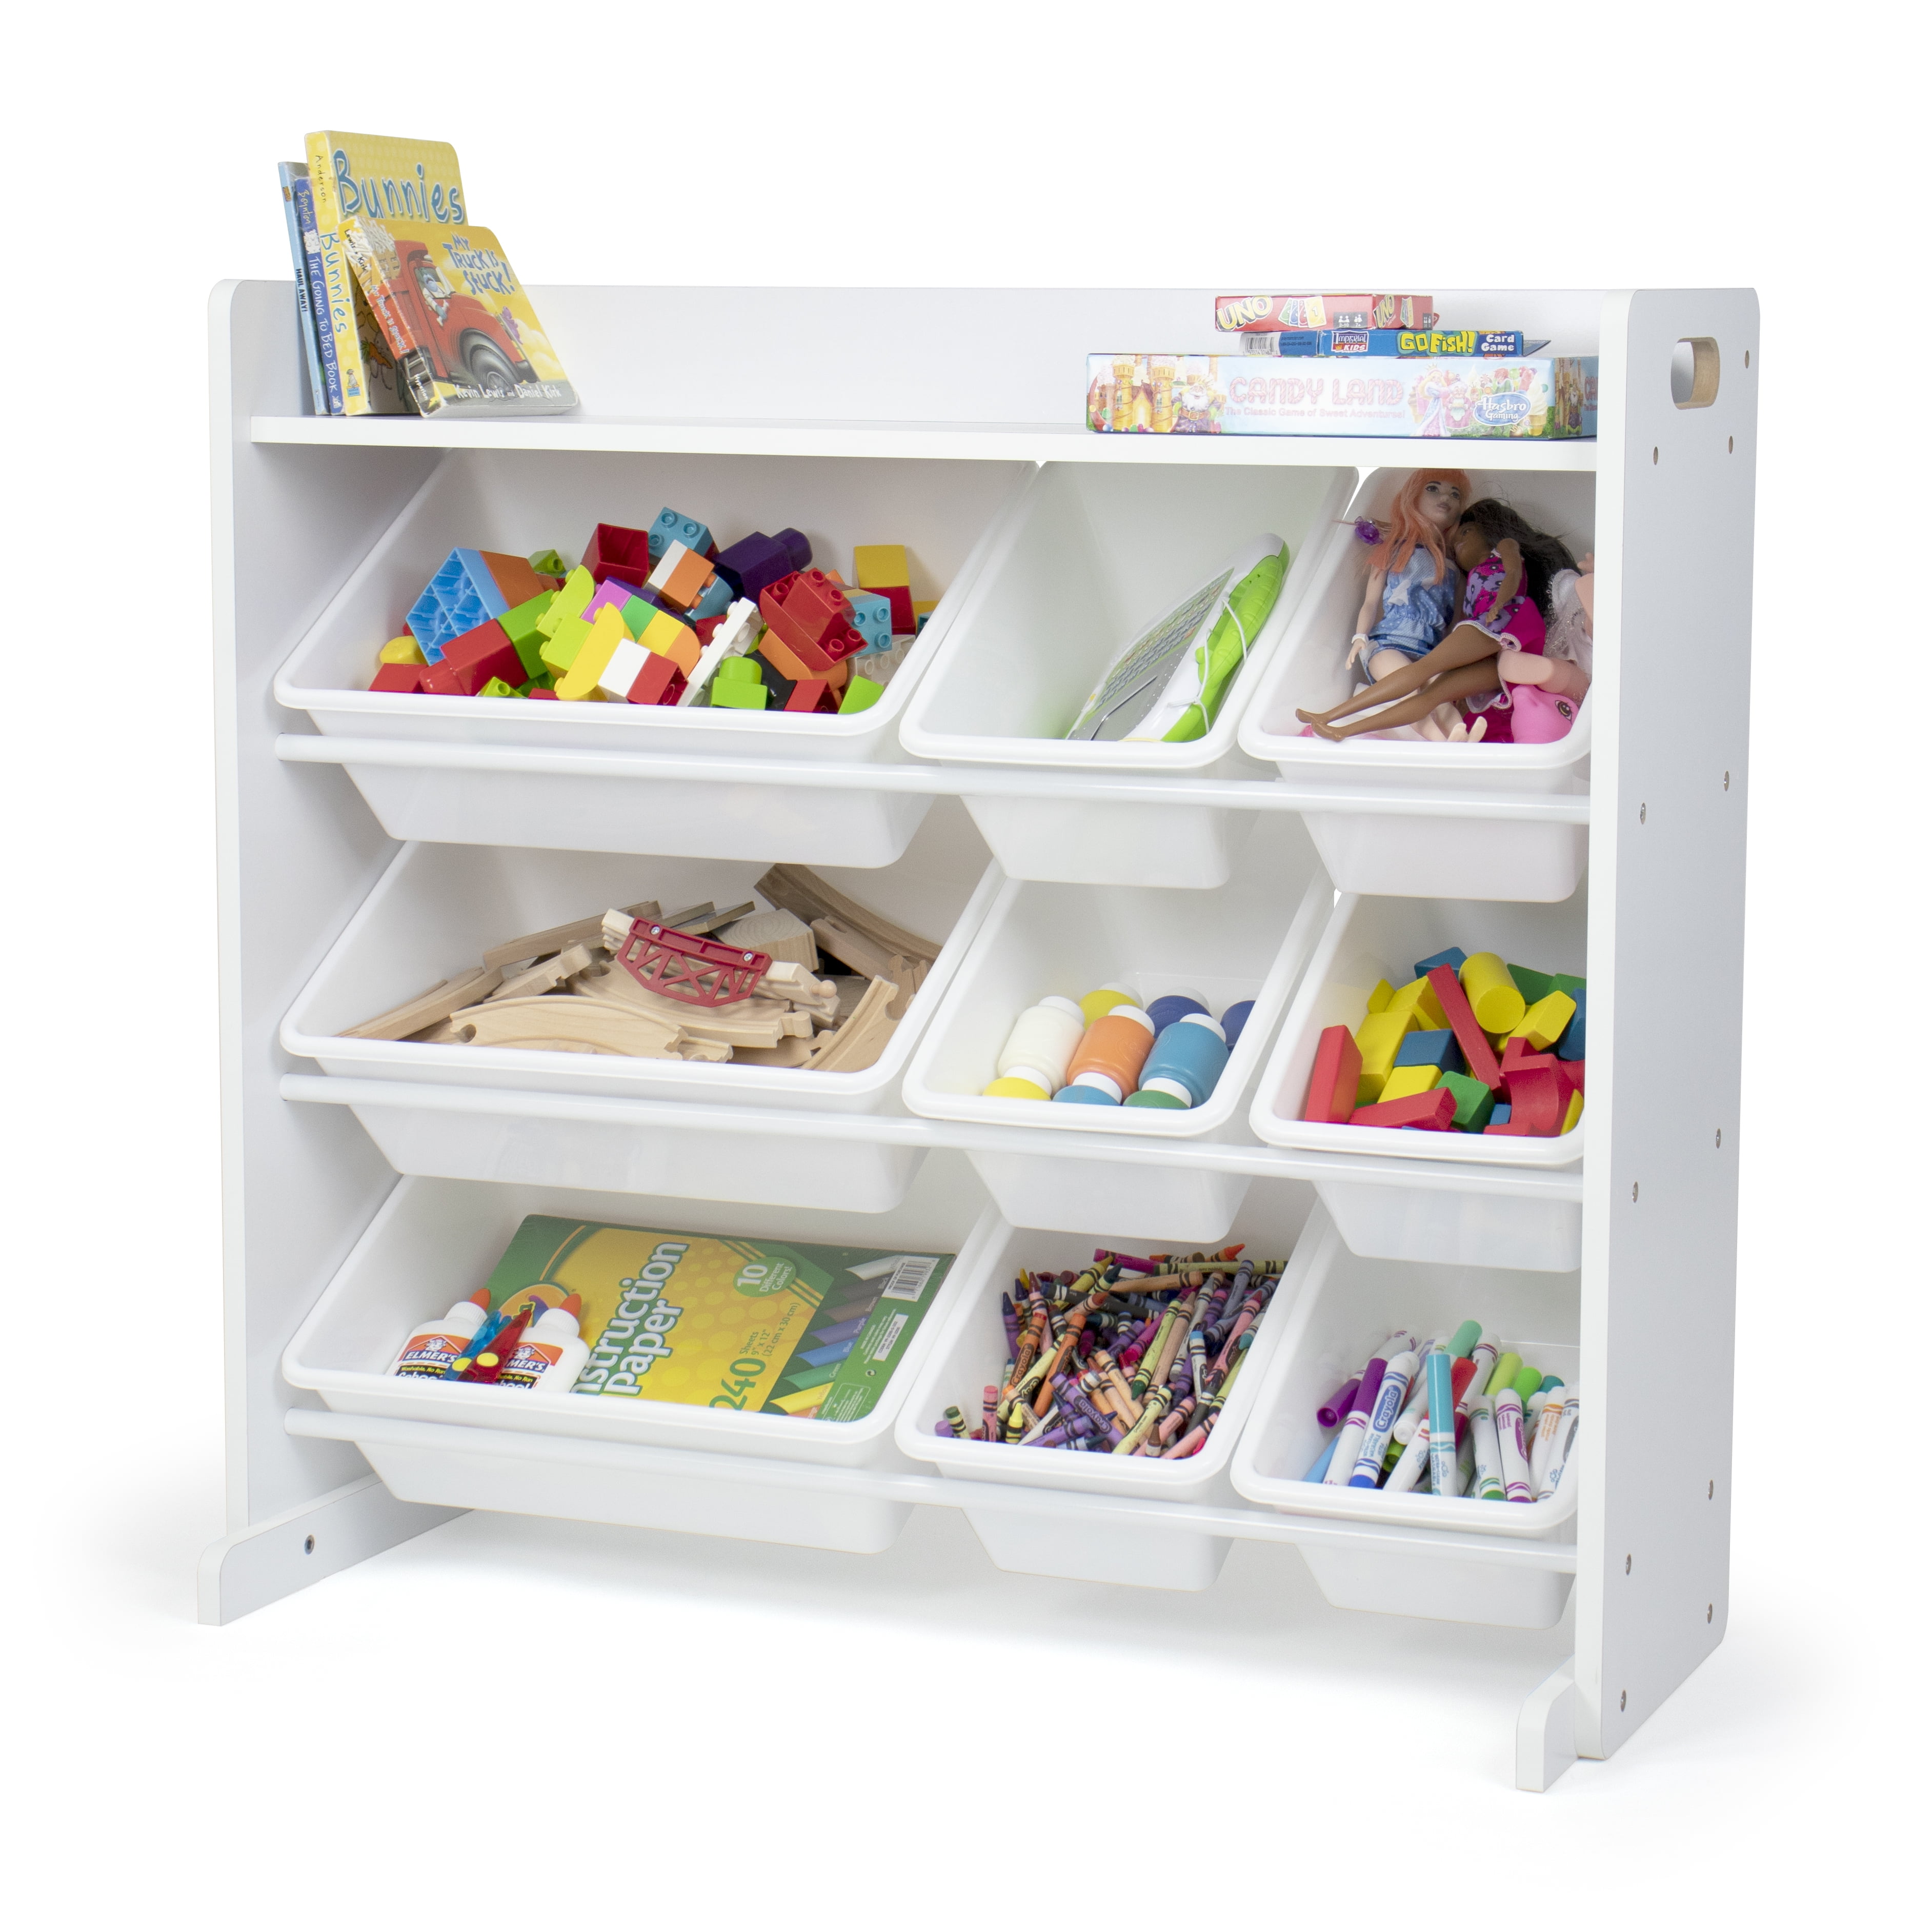 580 Guardar Juguetes ideas  toy storage, toy rooms, toy organization